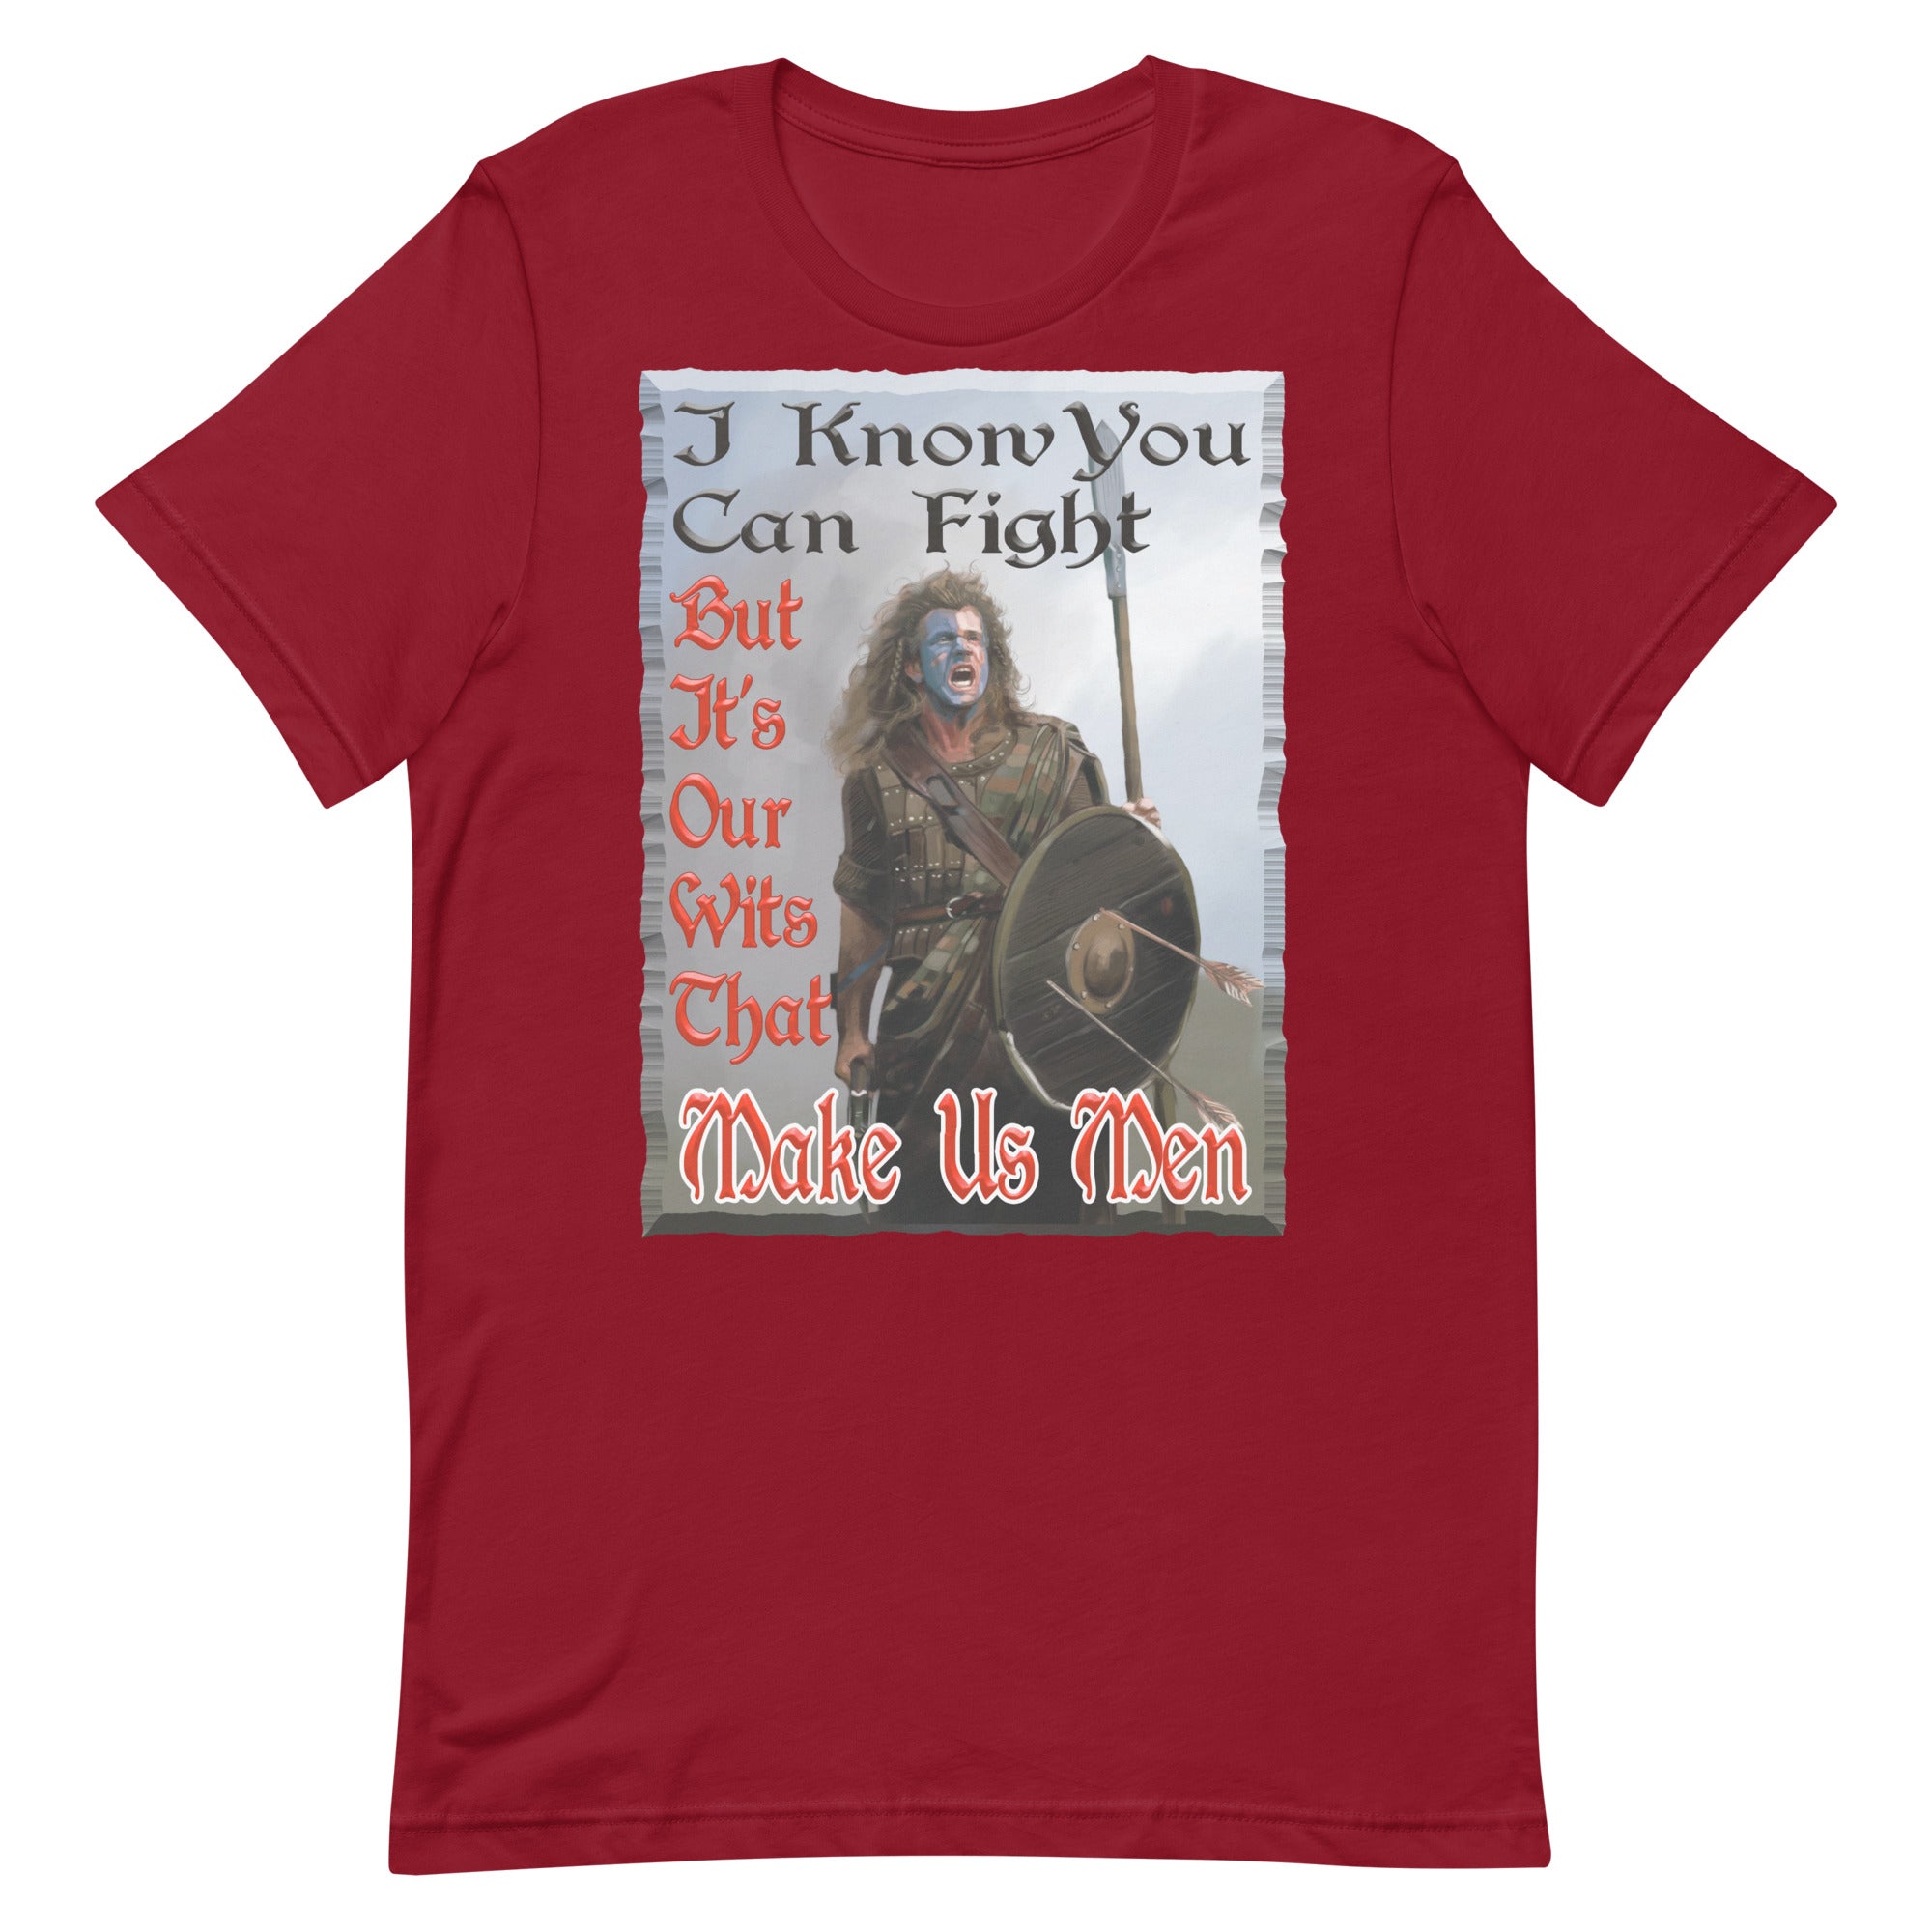 BRAVEHEART  -I KNOW YOU CAN FIGHT  -BUT IT'S OUR WITS THAT MAKE US MEN